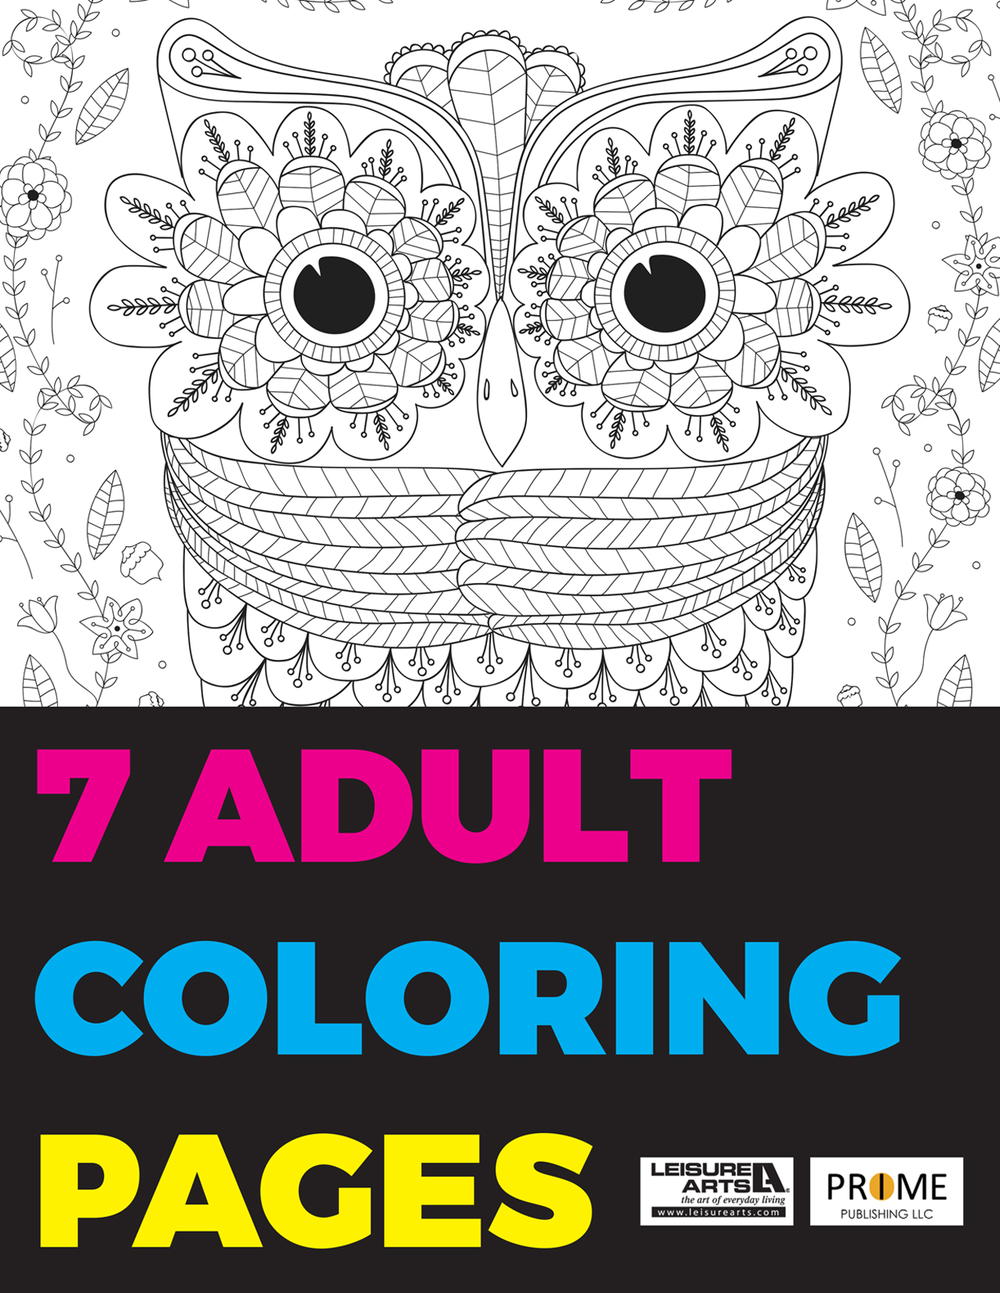 BEAUTIFUL OWLS Adults Coloring Book: Owl Coloring Book For Adults Stress  Relieving Designs, 70 Amazing Patterns, Coloring Book For Adults Relaxation.  (Paperback)